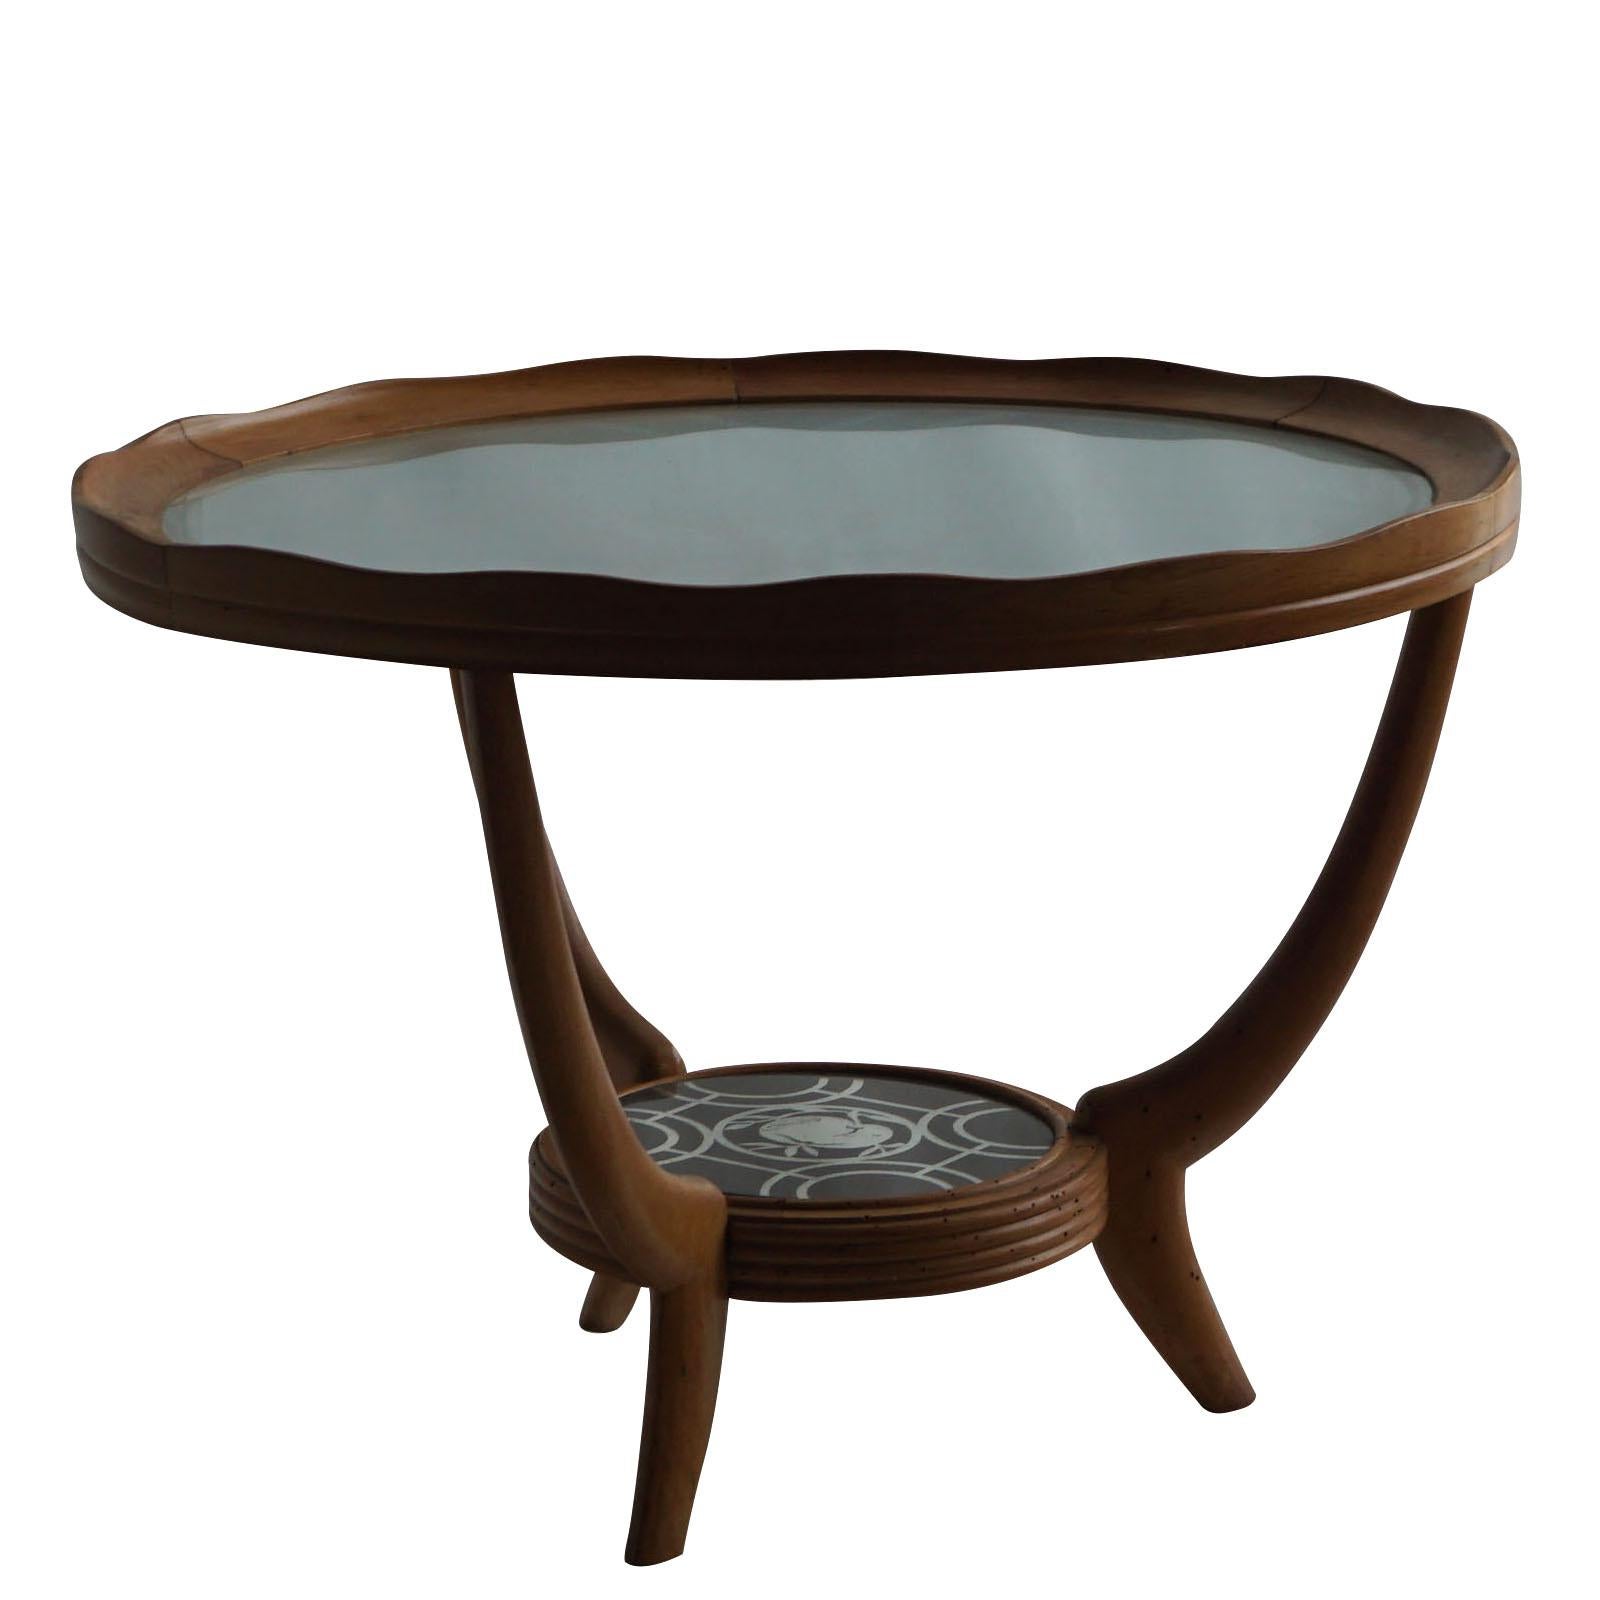 A Mid-Century Modern Italian two-tier side table made of wood with etched glass, in good condition. The upper wooden rim is unevenly carved and refinished in shellac hand polished cherrywood. The small sofa table is enhanced by detailed glass decor,